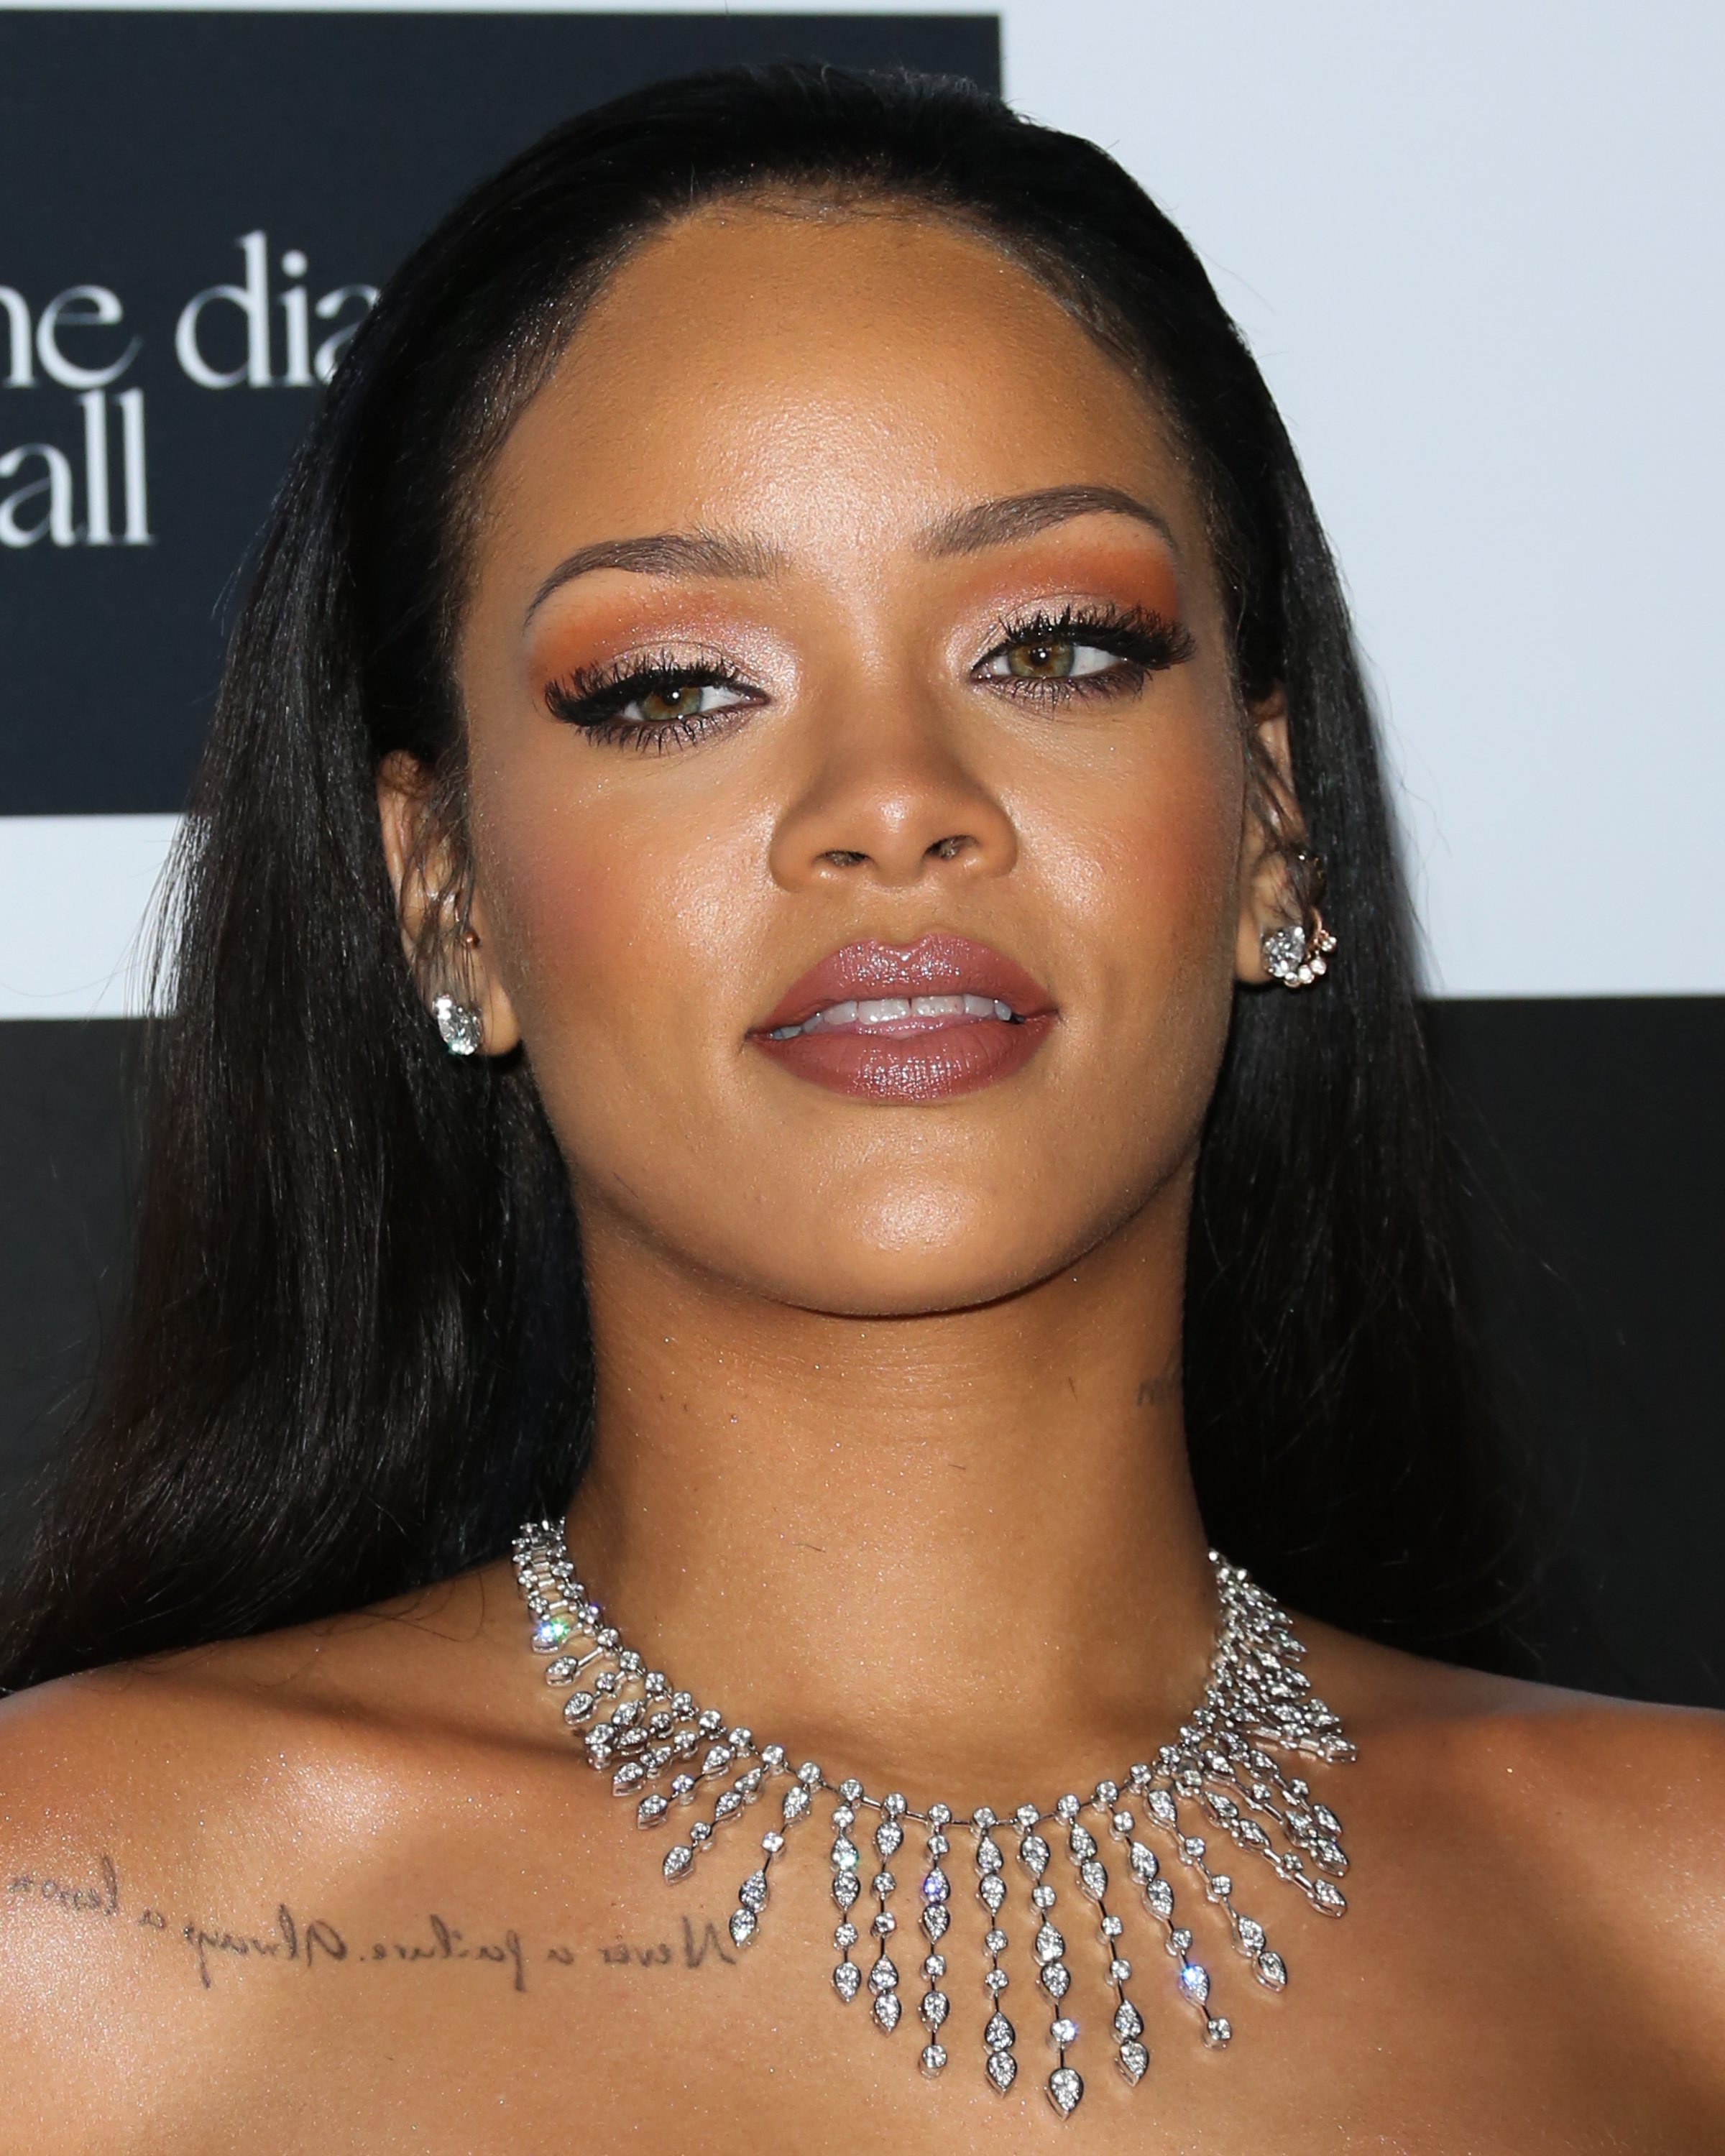 Rihanna hosting the 2nd Annual Diamond Ball in December 2015. | Photo: Getty Images